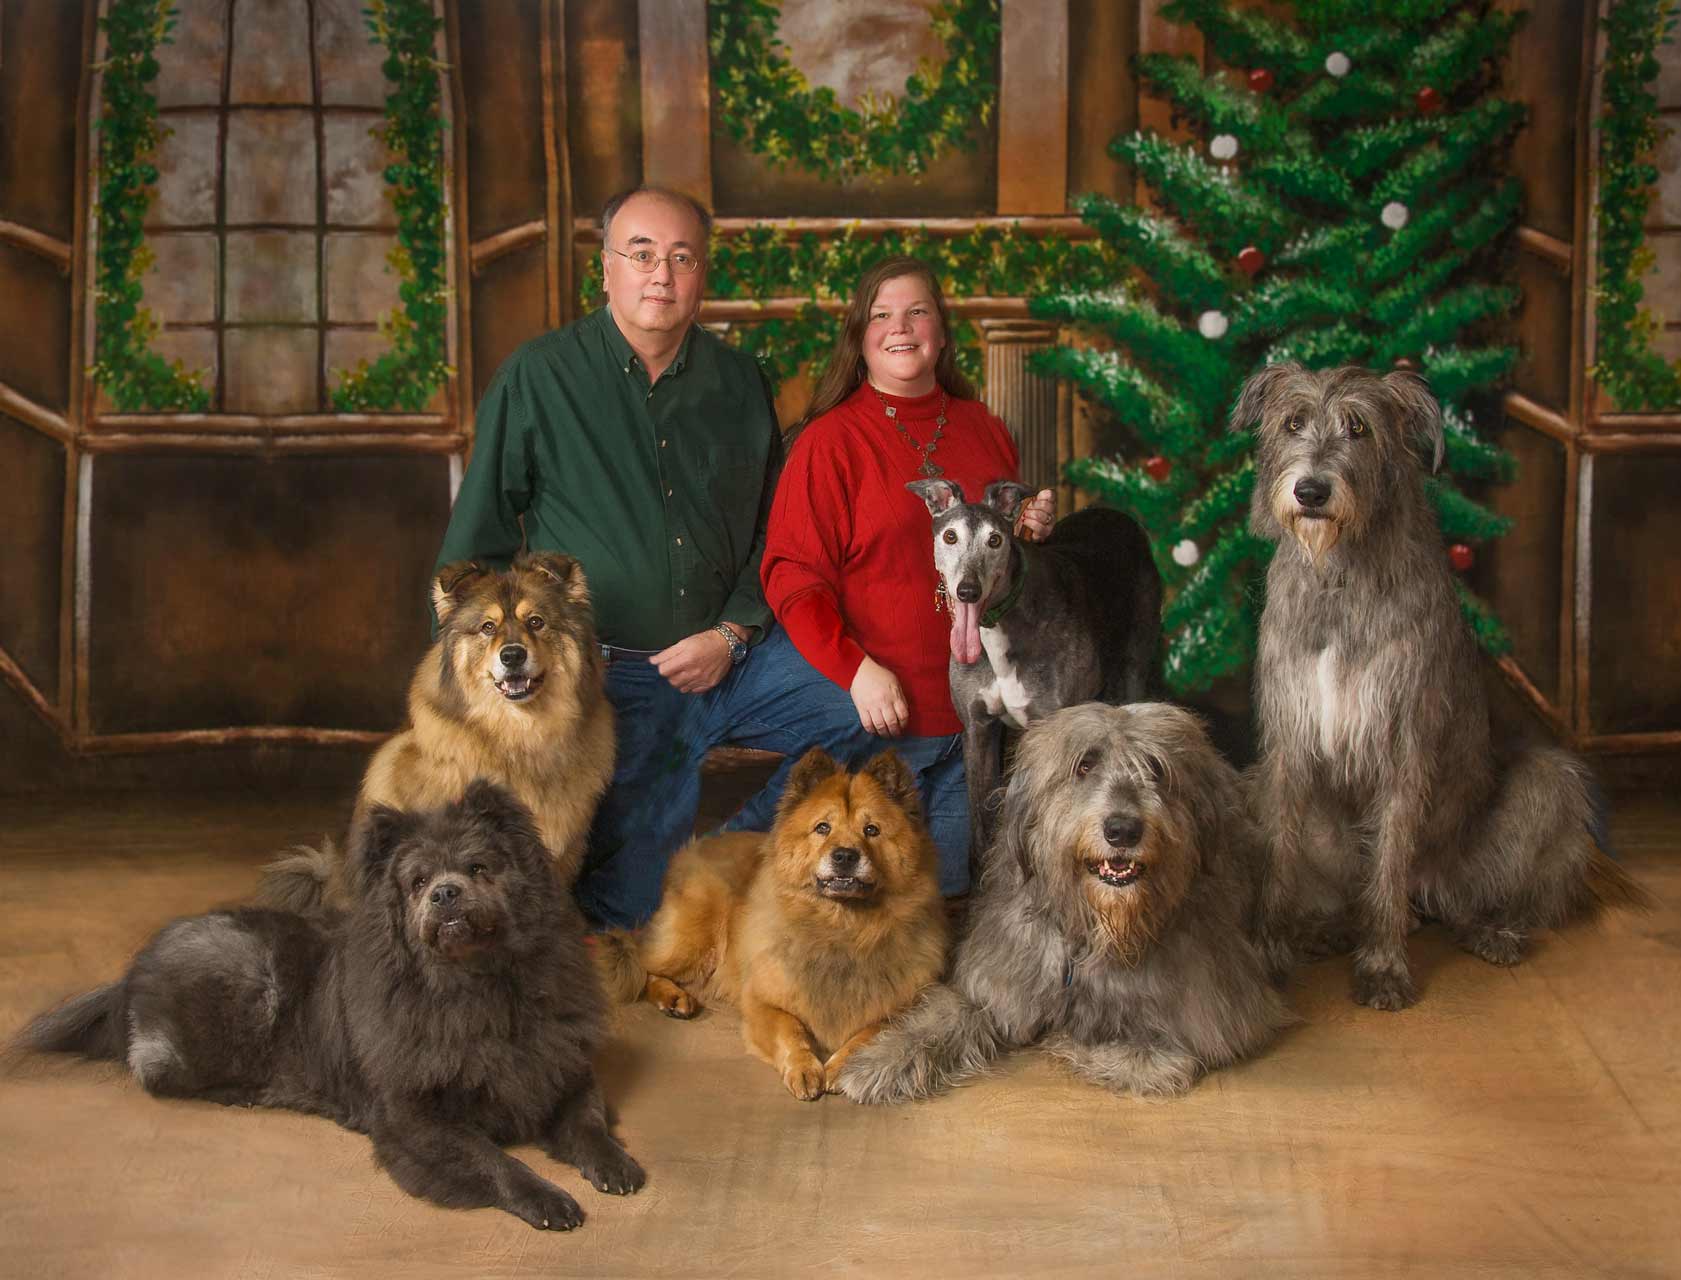 A man and woman posing with their dogs.